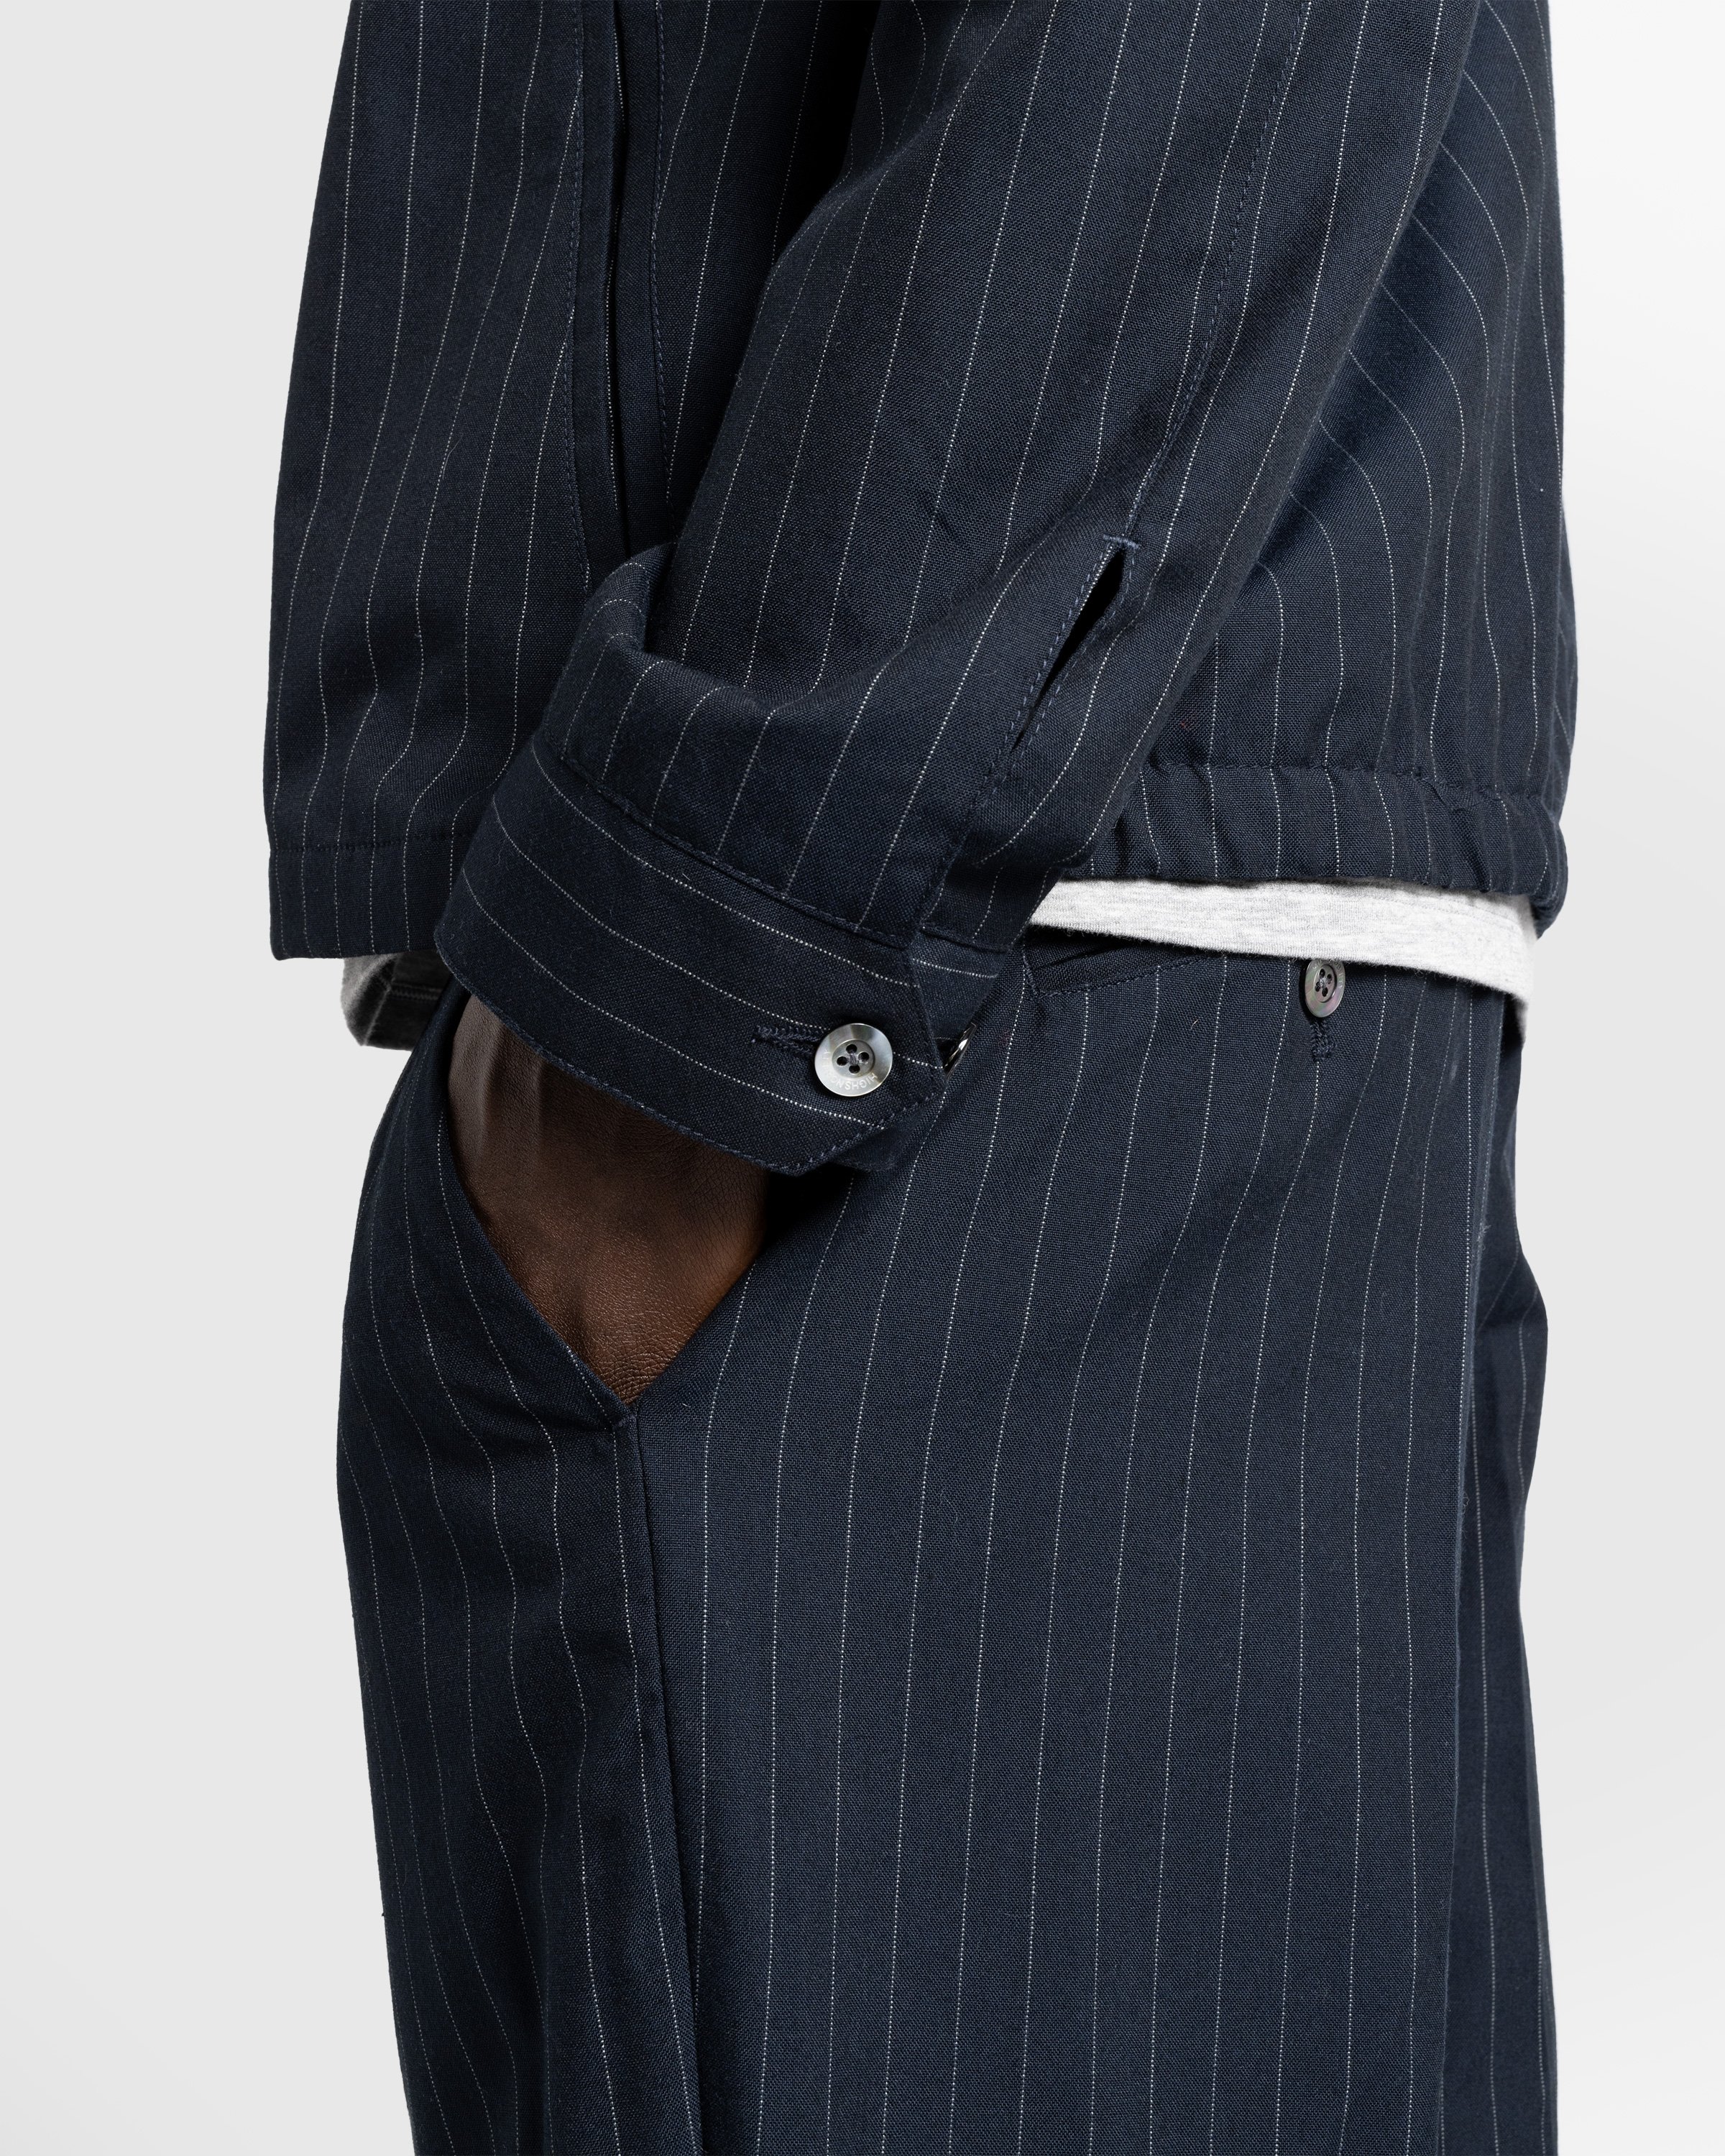 Highsnobiety HS05 - Tropical Suiting Pants Navy Striped - Clothing - Navy Striped - Image 5